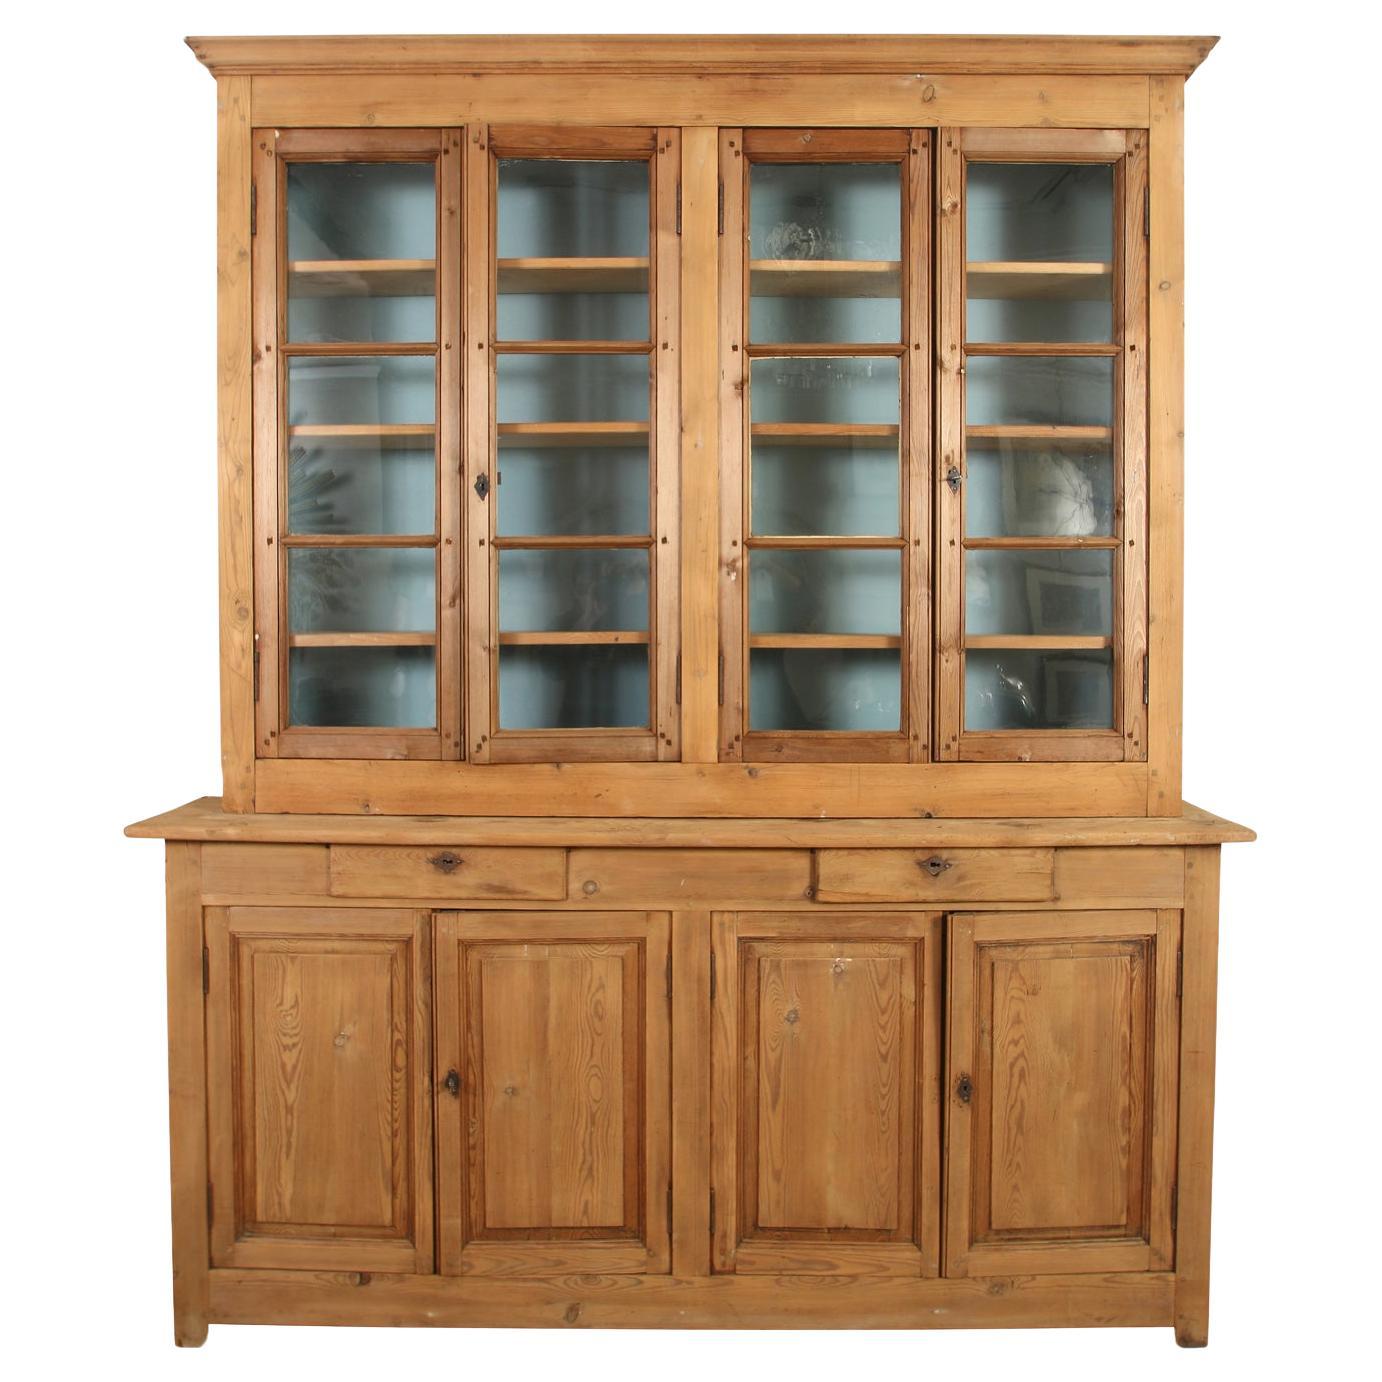 A French Pine Bookcase with Four Doors